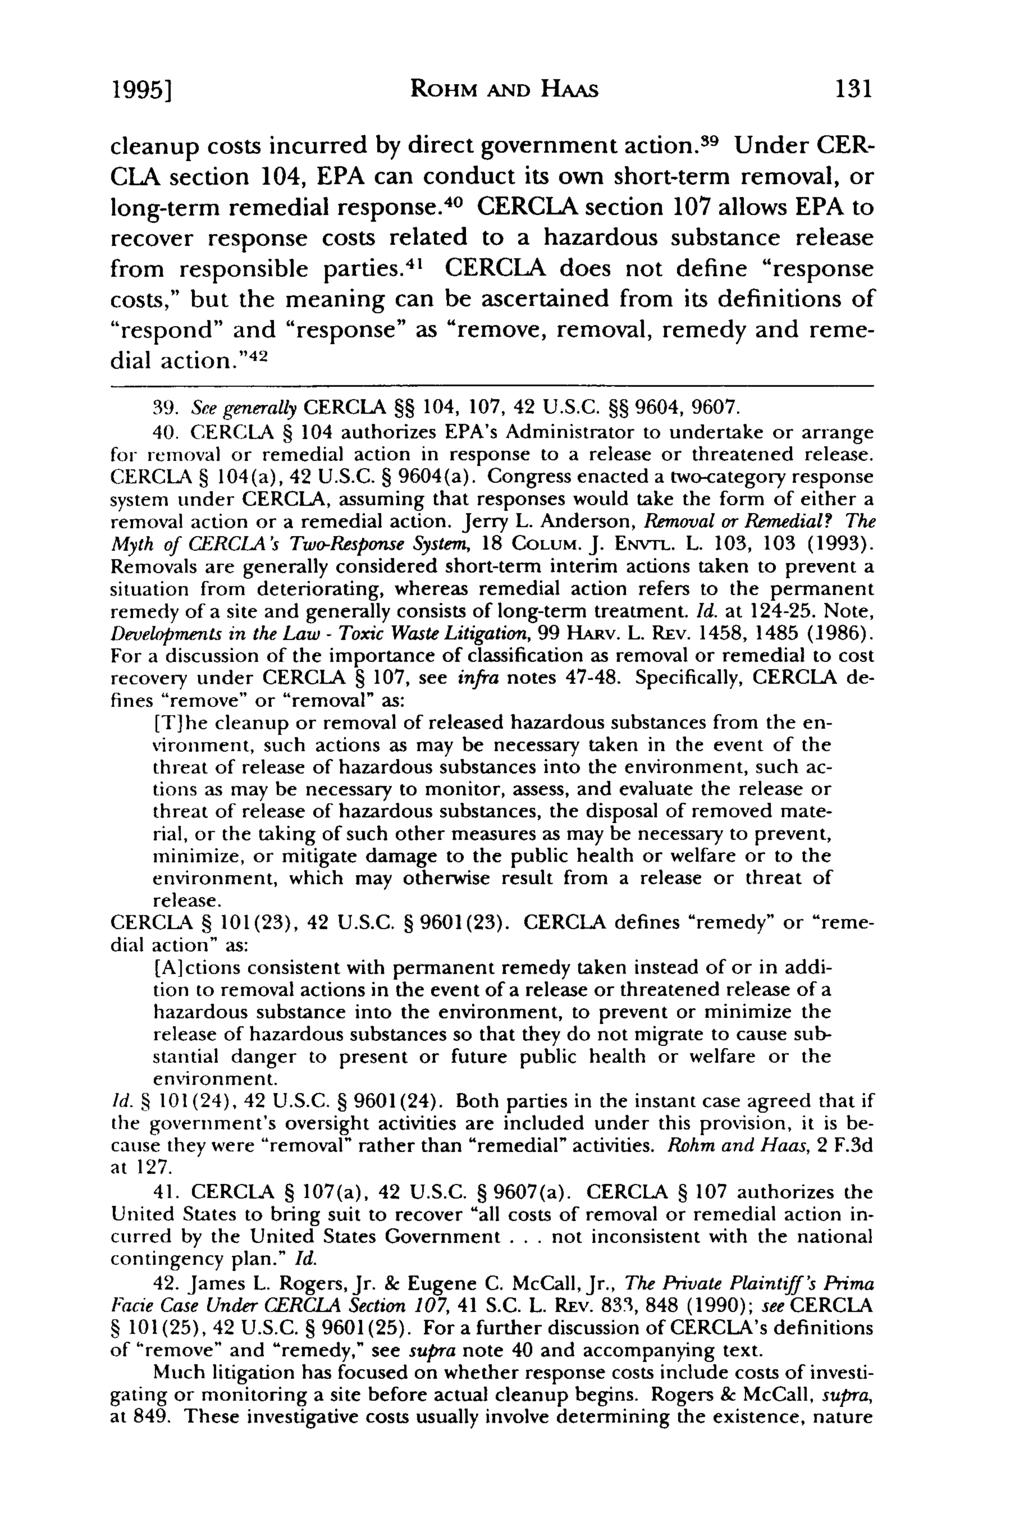 1995] Aberbach: Recoverability of Government Oversight Costs under CERCLA Section ROHM AND HAAS cleanup costs incurred by direct government action.